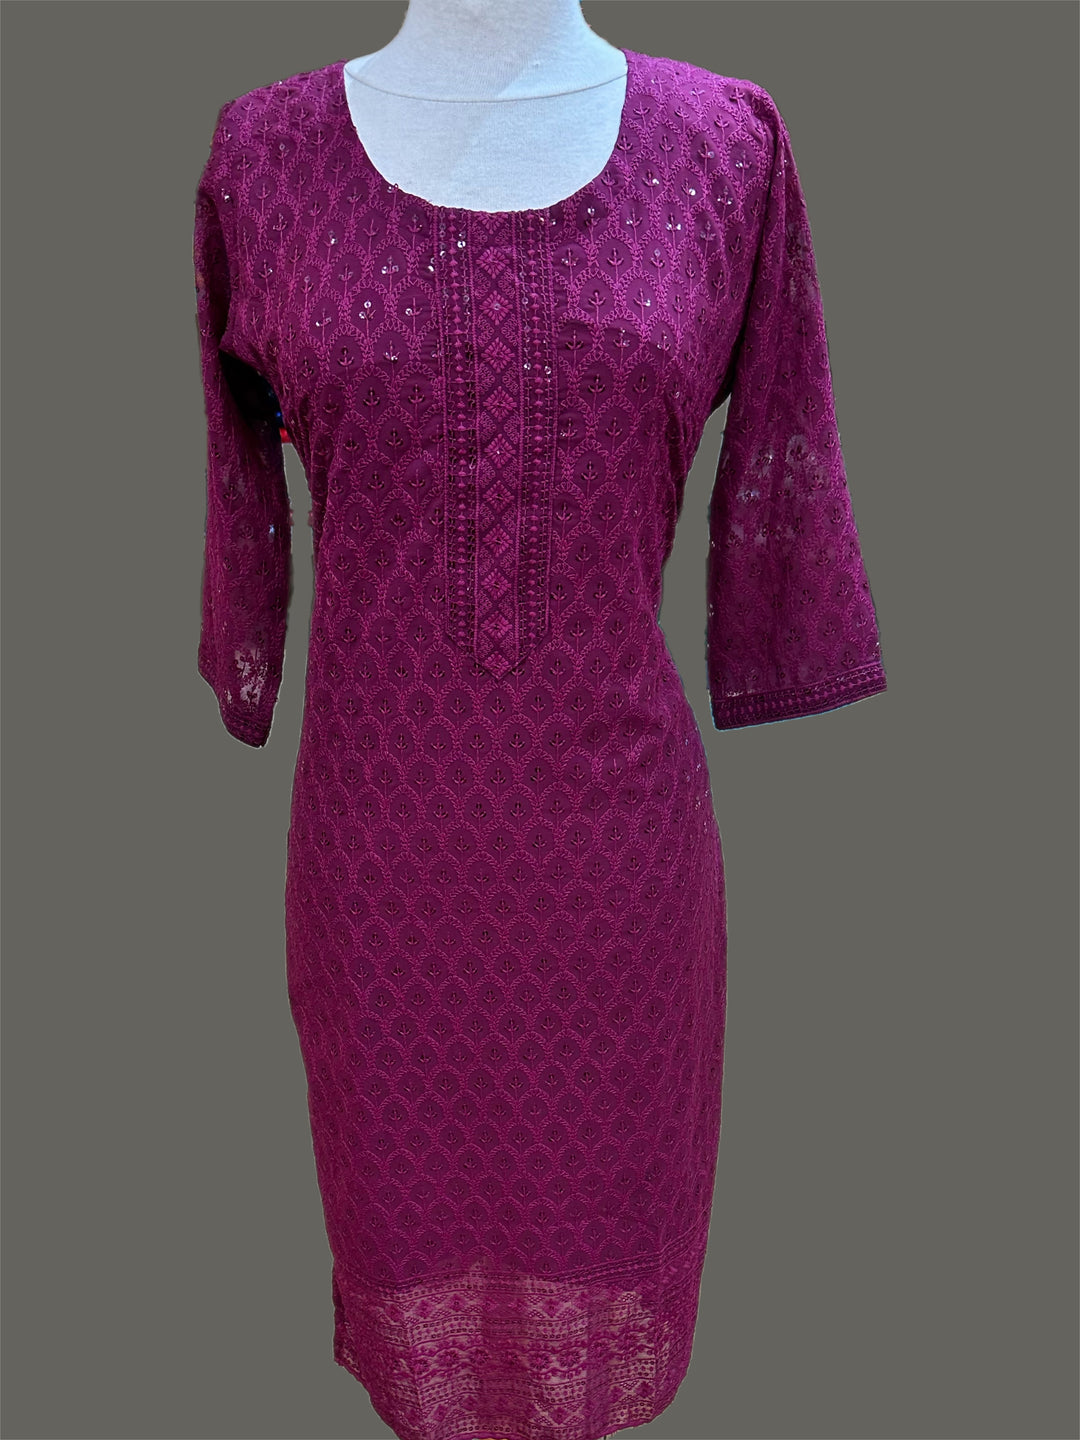 Long Sequin Kurti with Traditional Lucknowi Embroidery - Shree Shringar